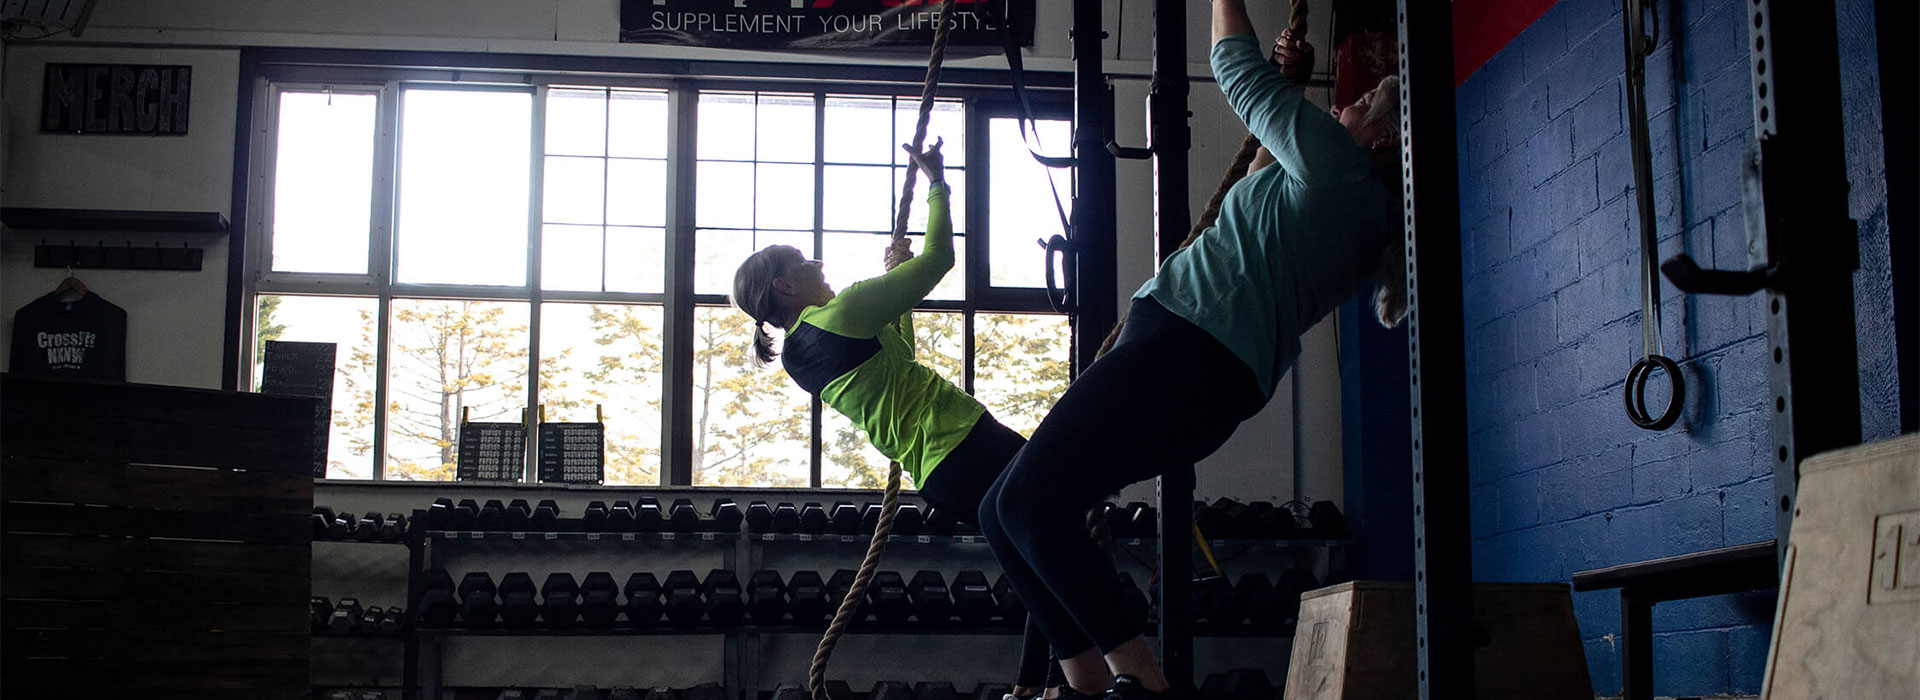 Why CrossFit NXNW Is Ranked One of the Best Gyms In Port Orchard